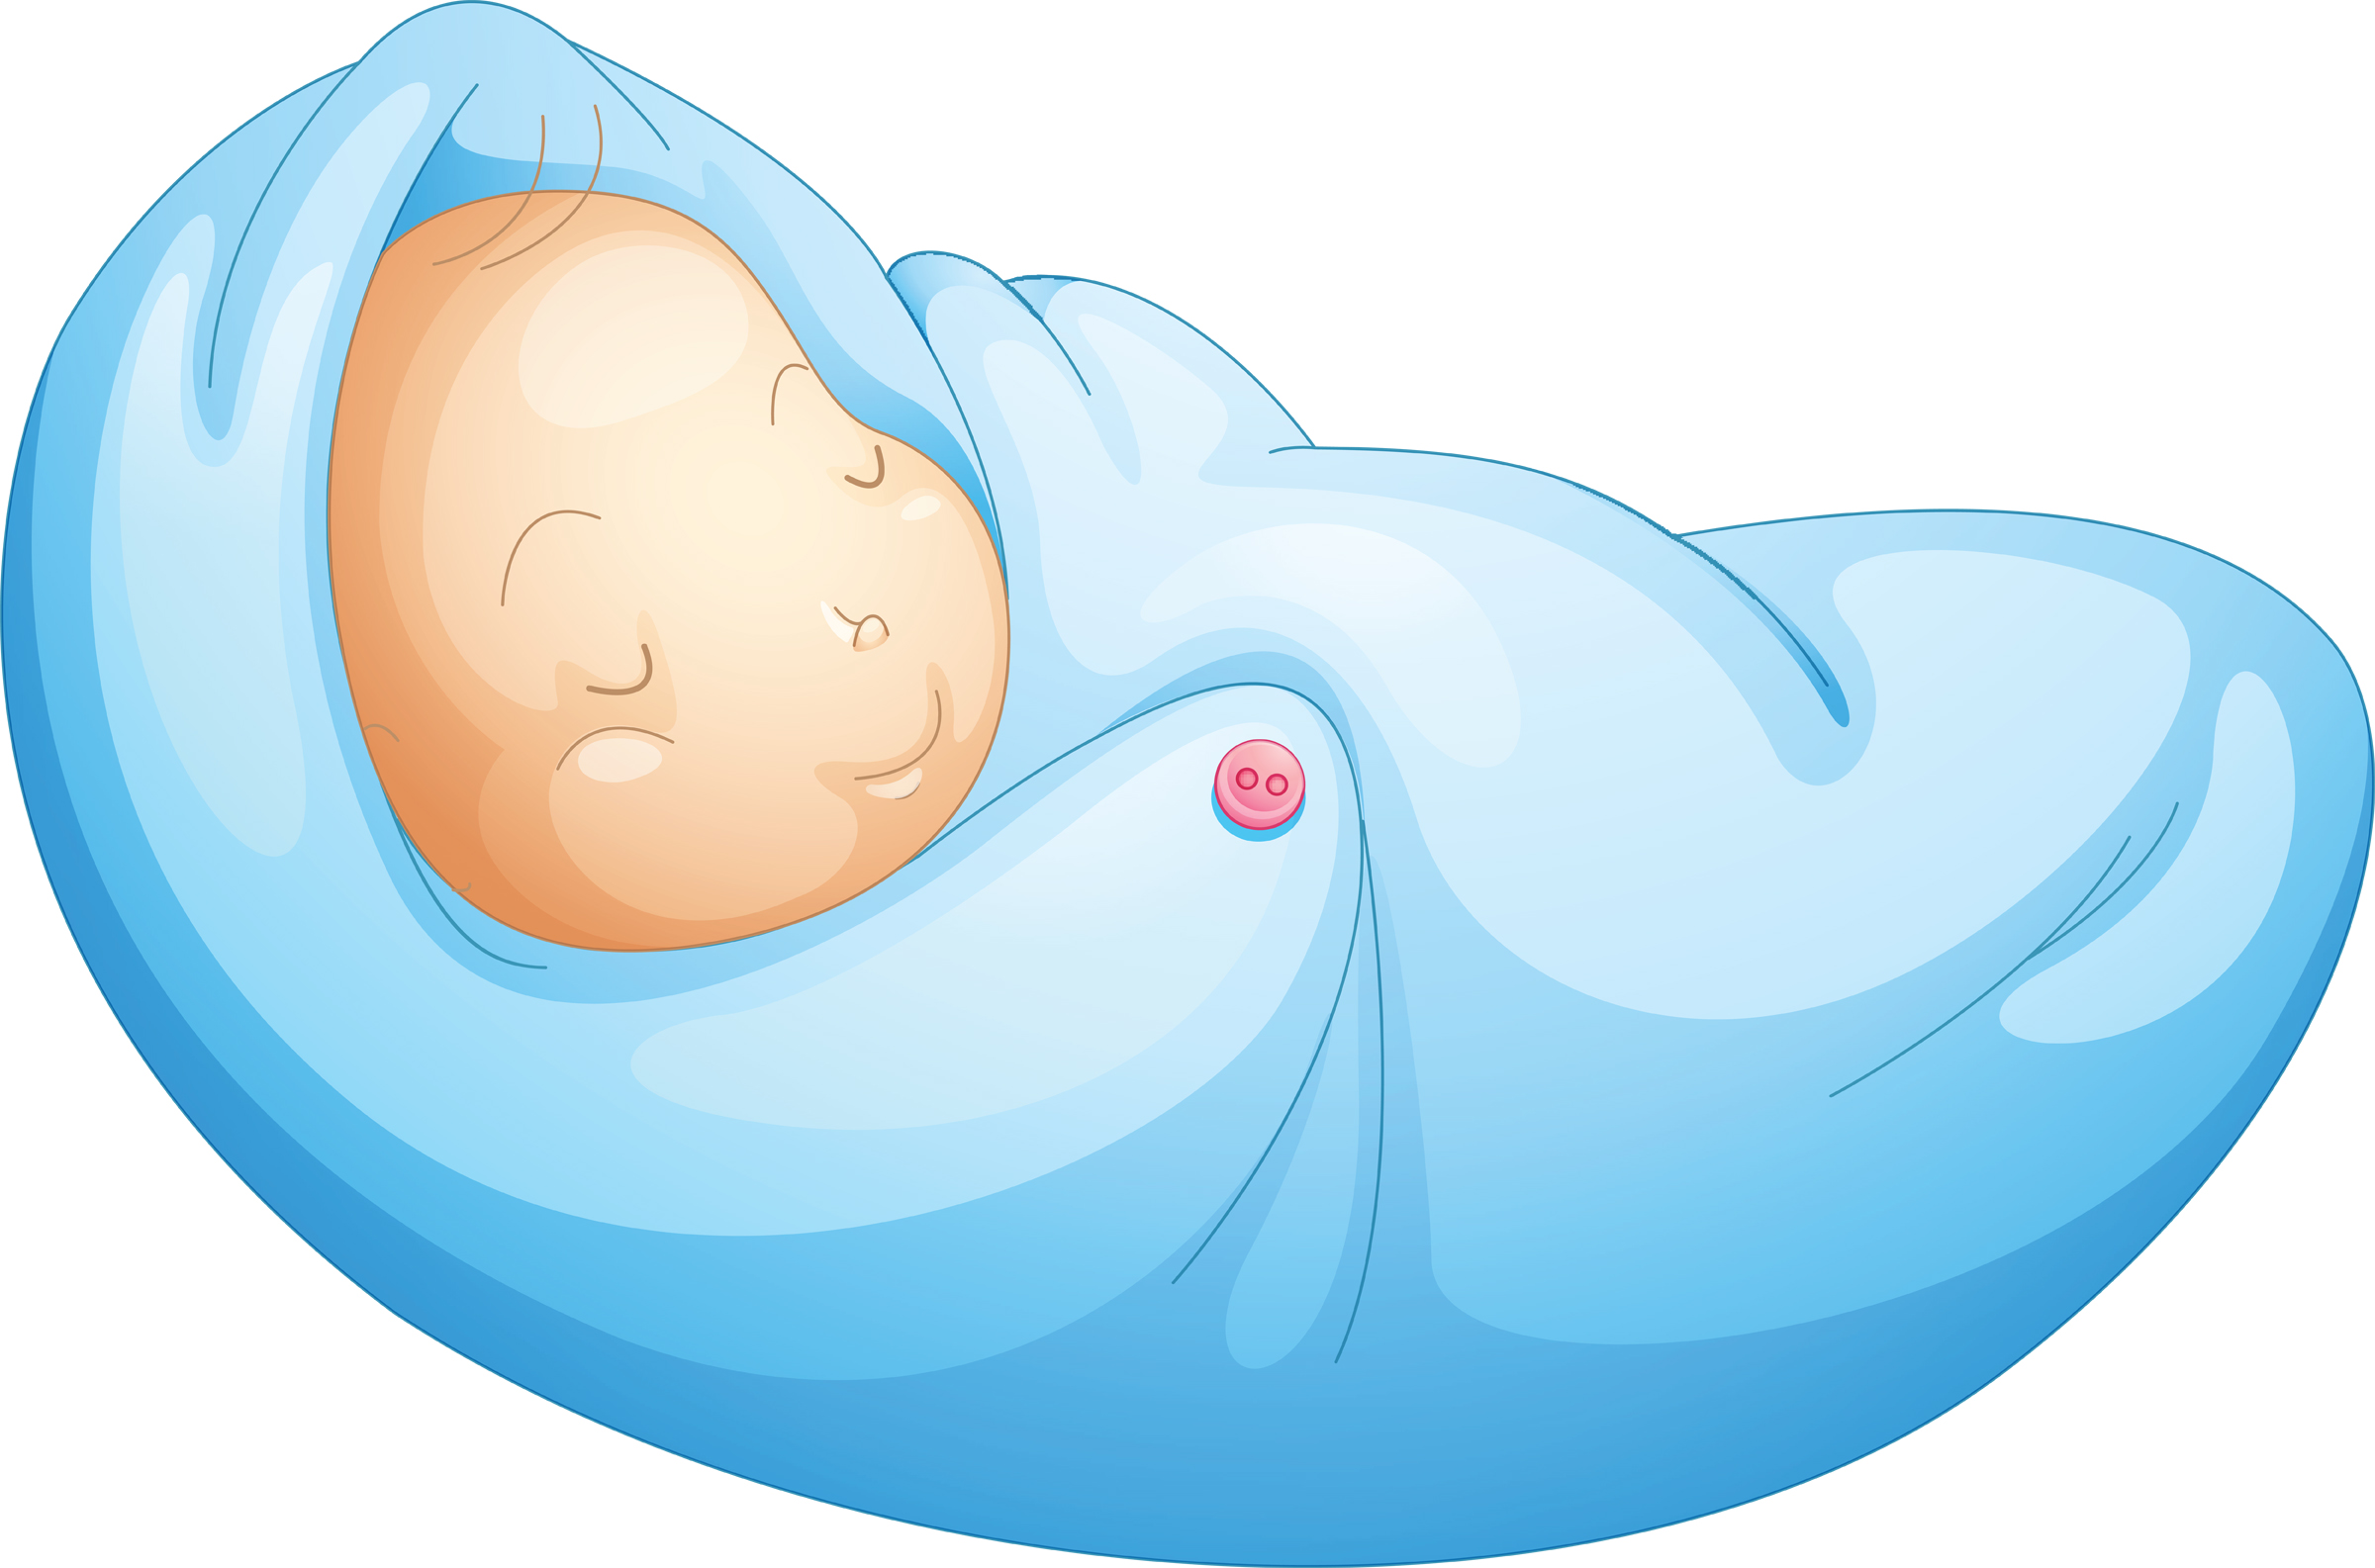 Newborn Baby Clipart Image. A